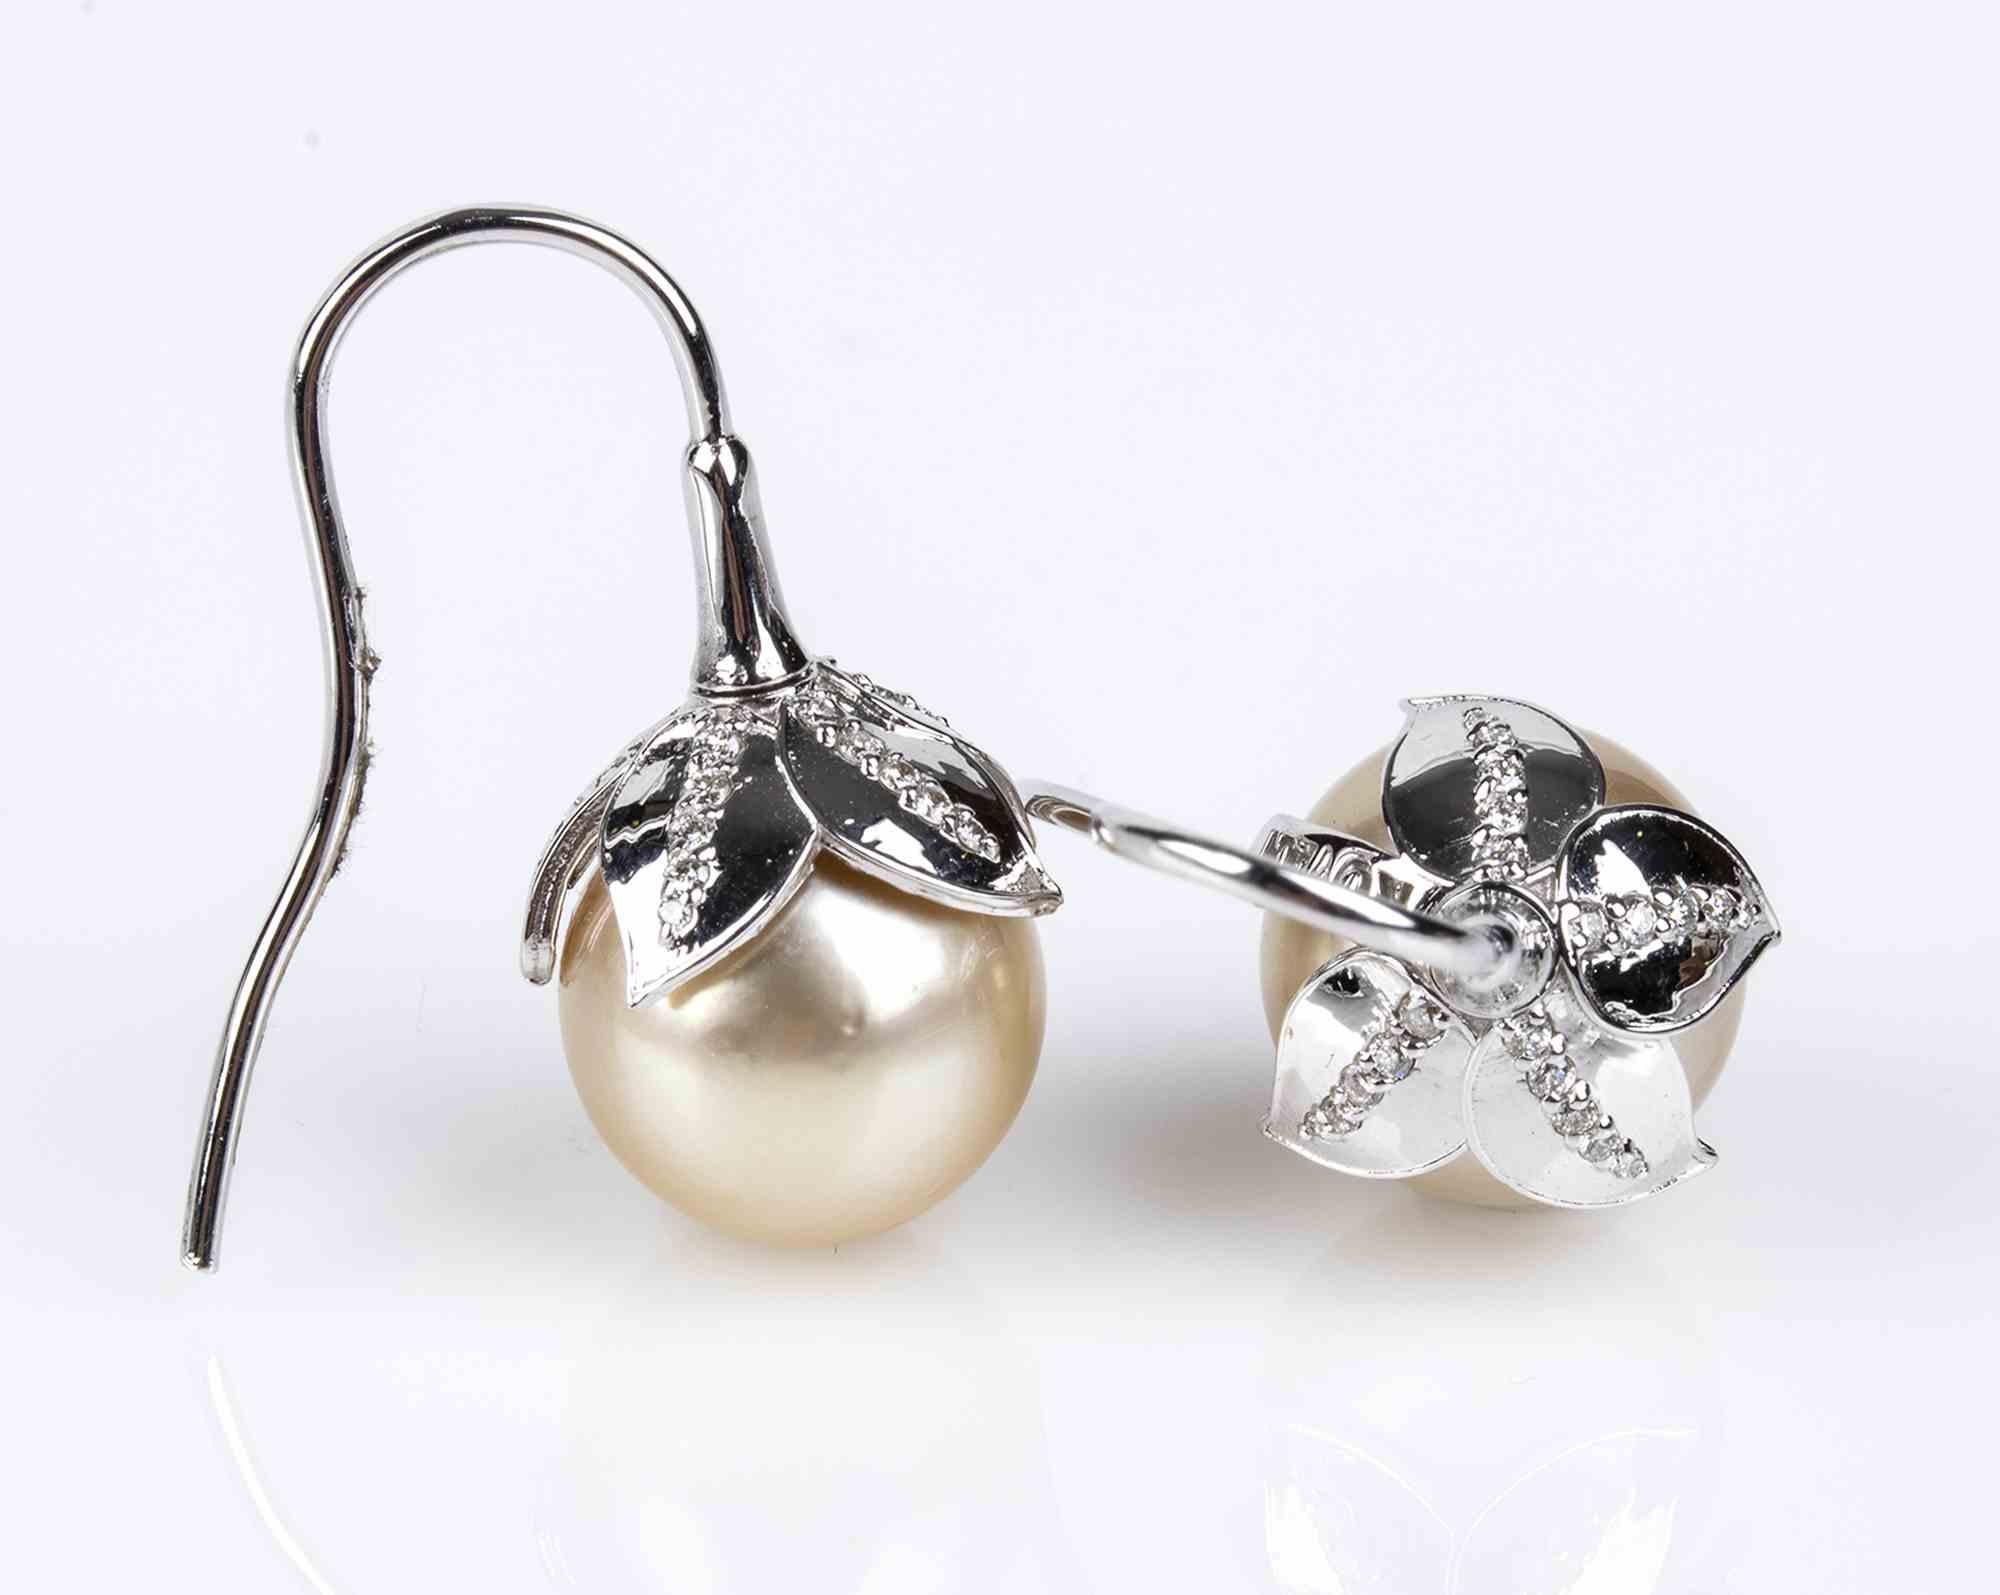 Gold, Australian pearl and diamonds earrings

Each with Australian pearl surmounted by leaf shape brilliant cut pavé set diamonds ca. 0.24 ct total, G, VVS. Length 25 mm, pearls diameter 11.5-12 mm. Weight 9.1 gr.
18k white gold.
Item condition